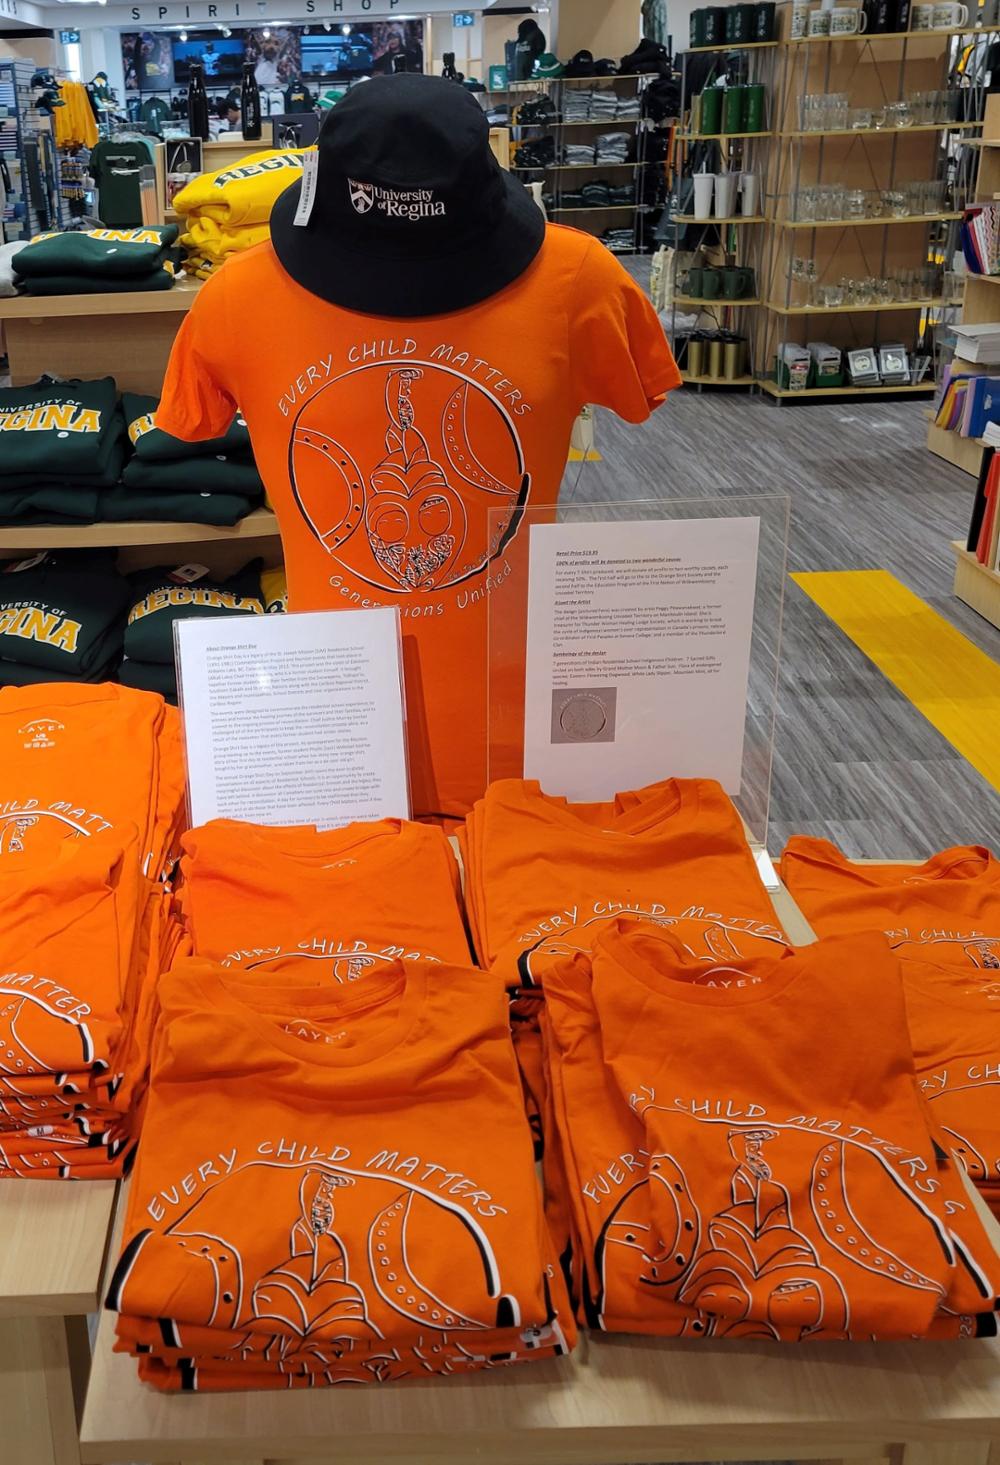 Several bright orange t-shirts with the words EVERY CHILD MATTERS and graphic image on display